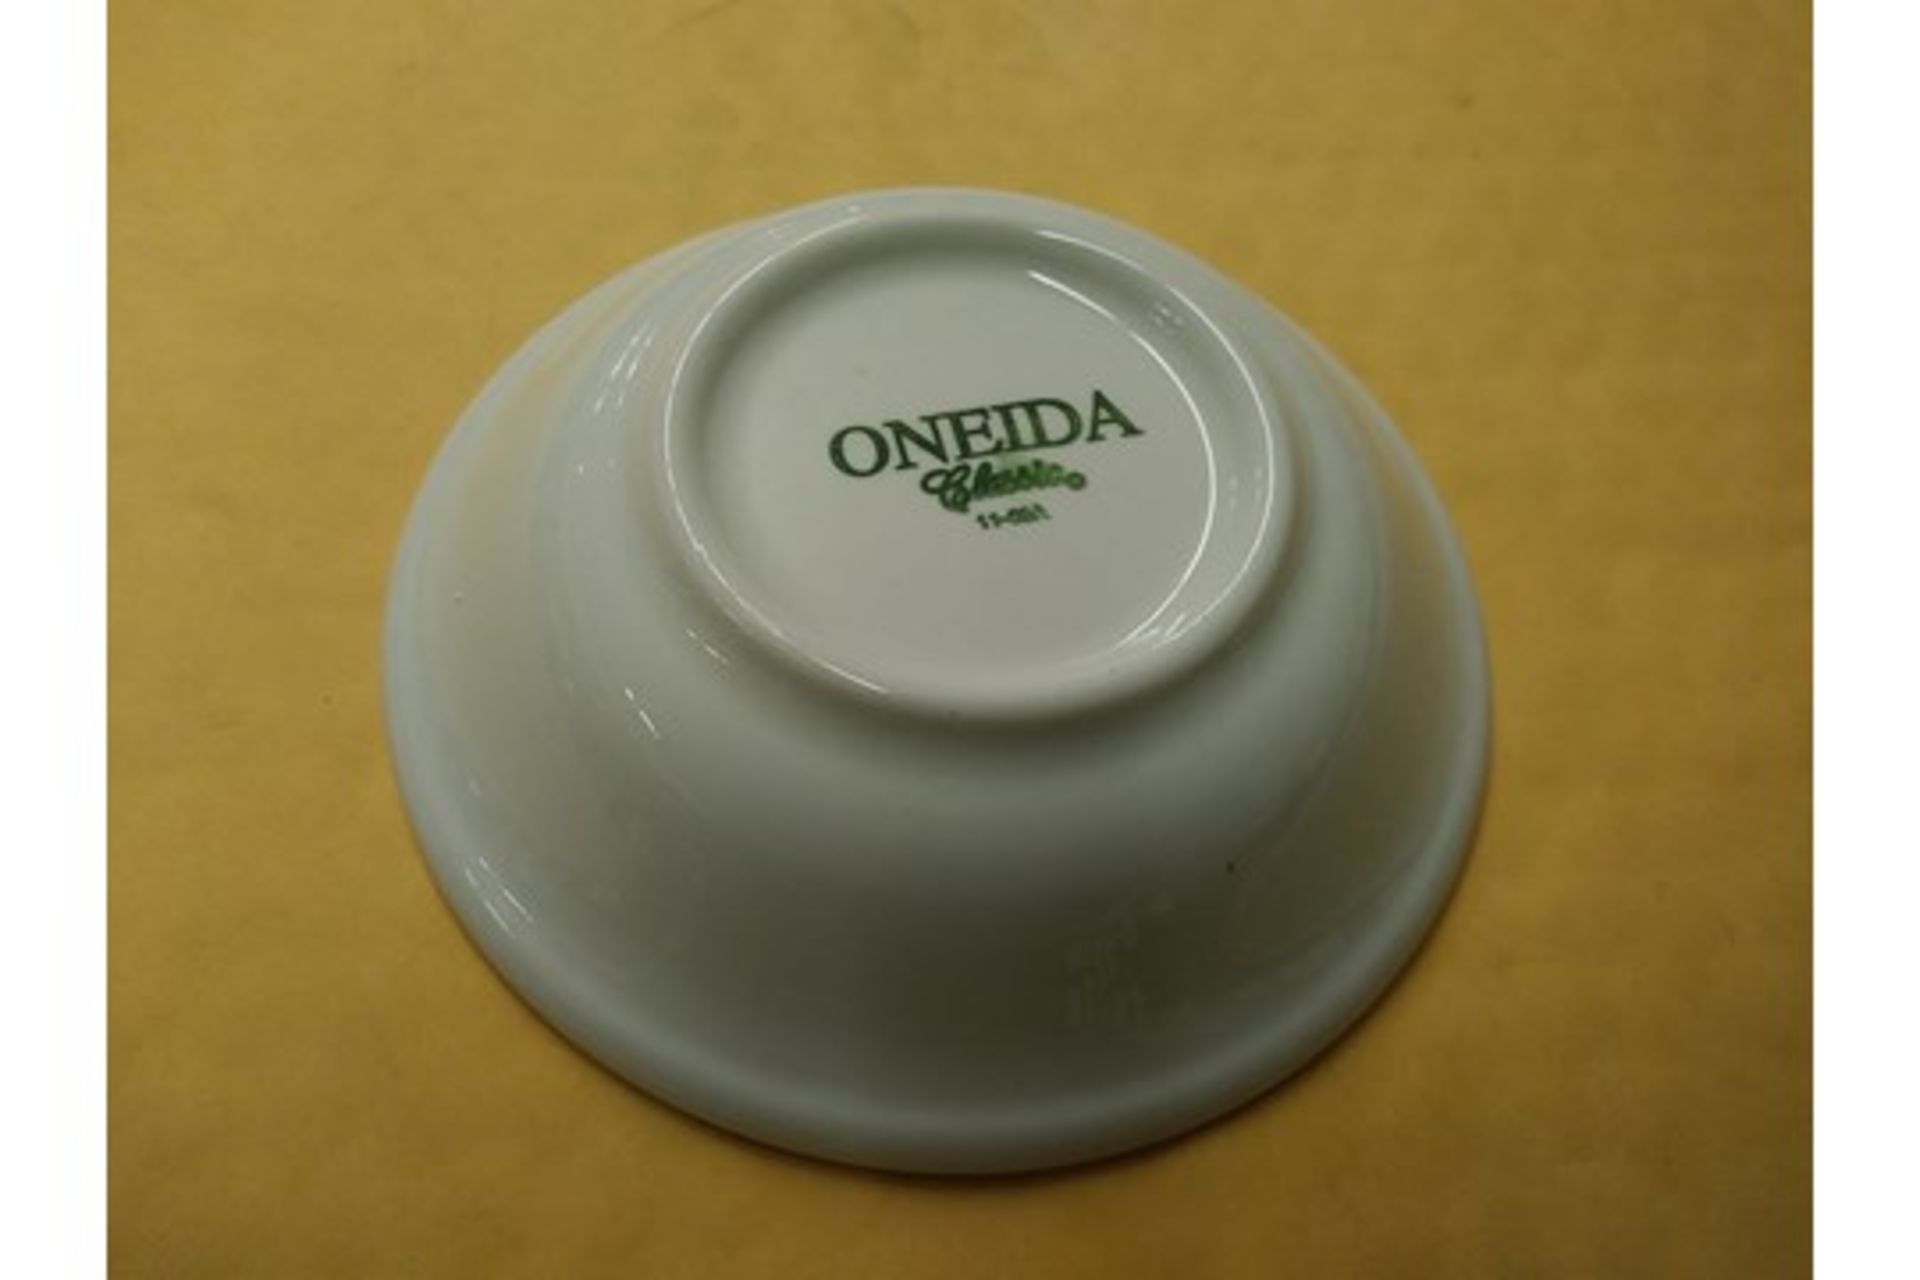 5" ONEIDA CLASSIC (1106A) DISH (includes approx QTY 445 in this lot) - Image 3 of 3